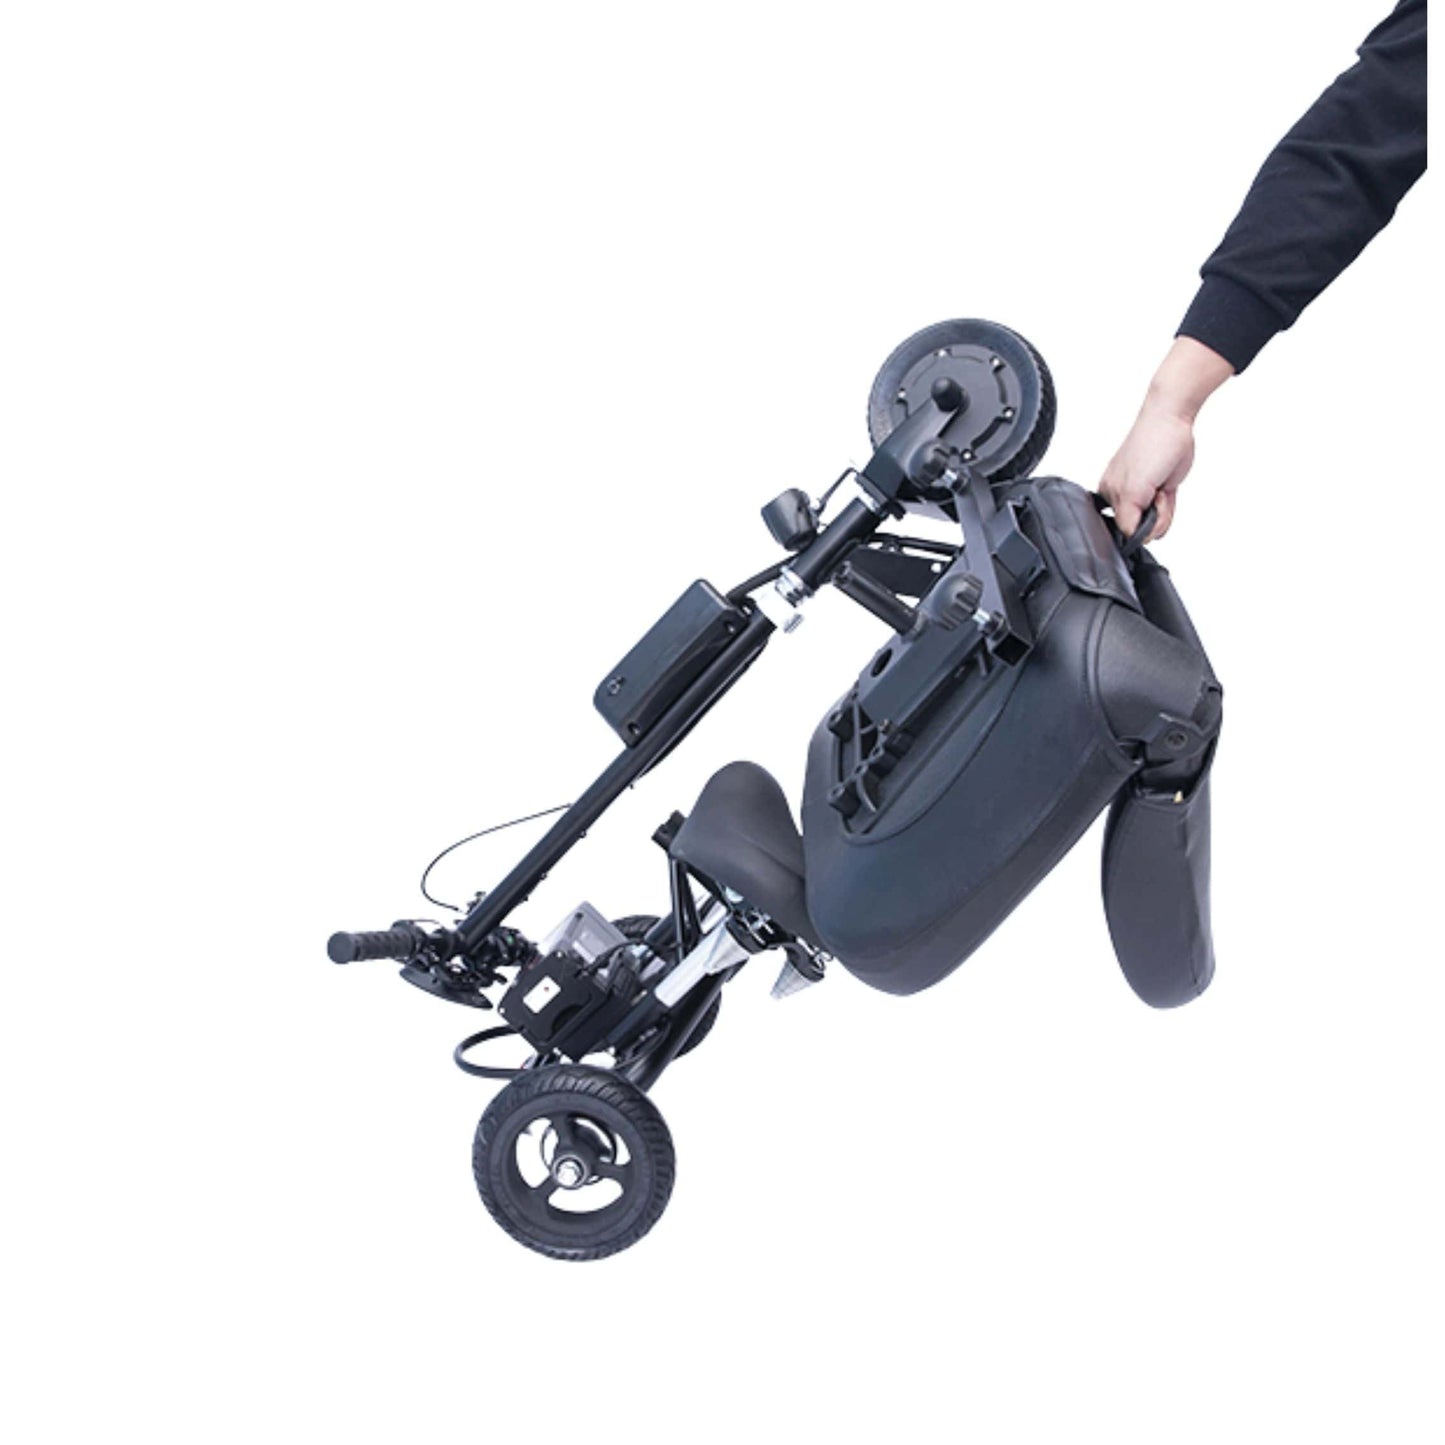 Glion SnapnGo Electric Scooter